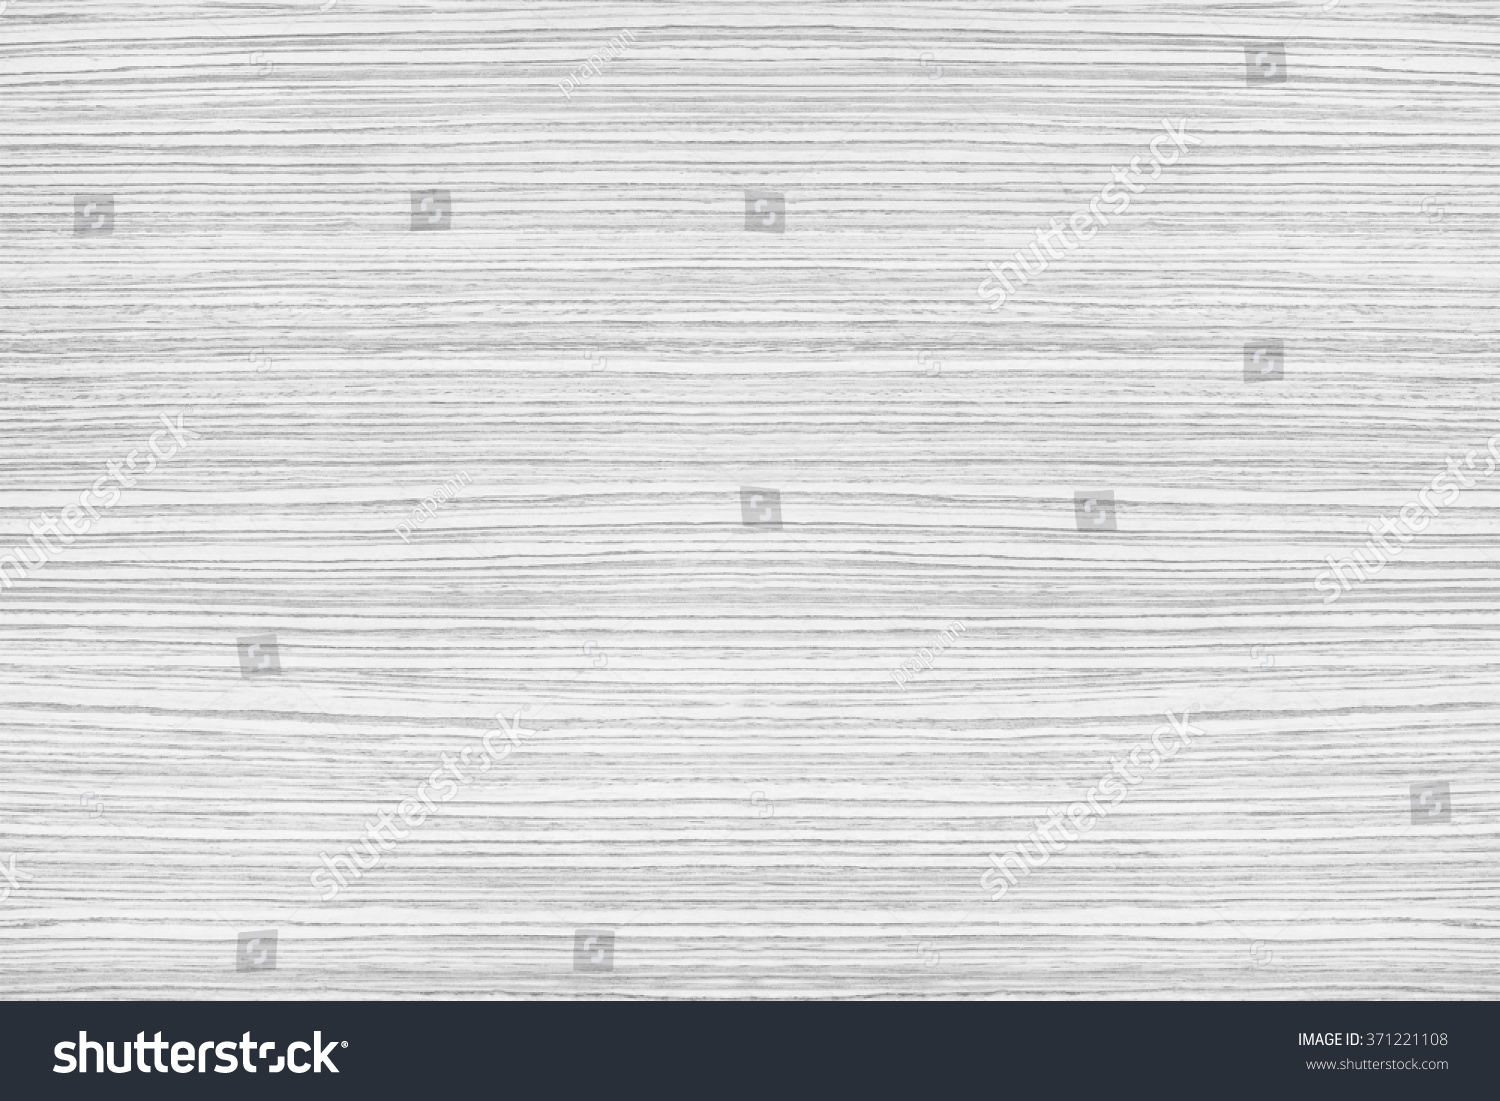 White plywood texture / gray wood background #371221108